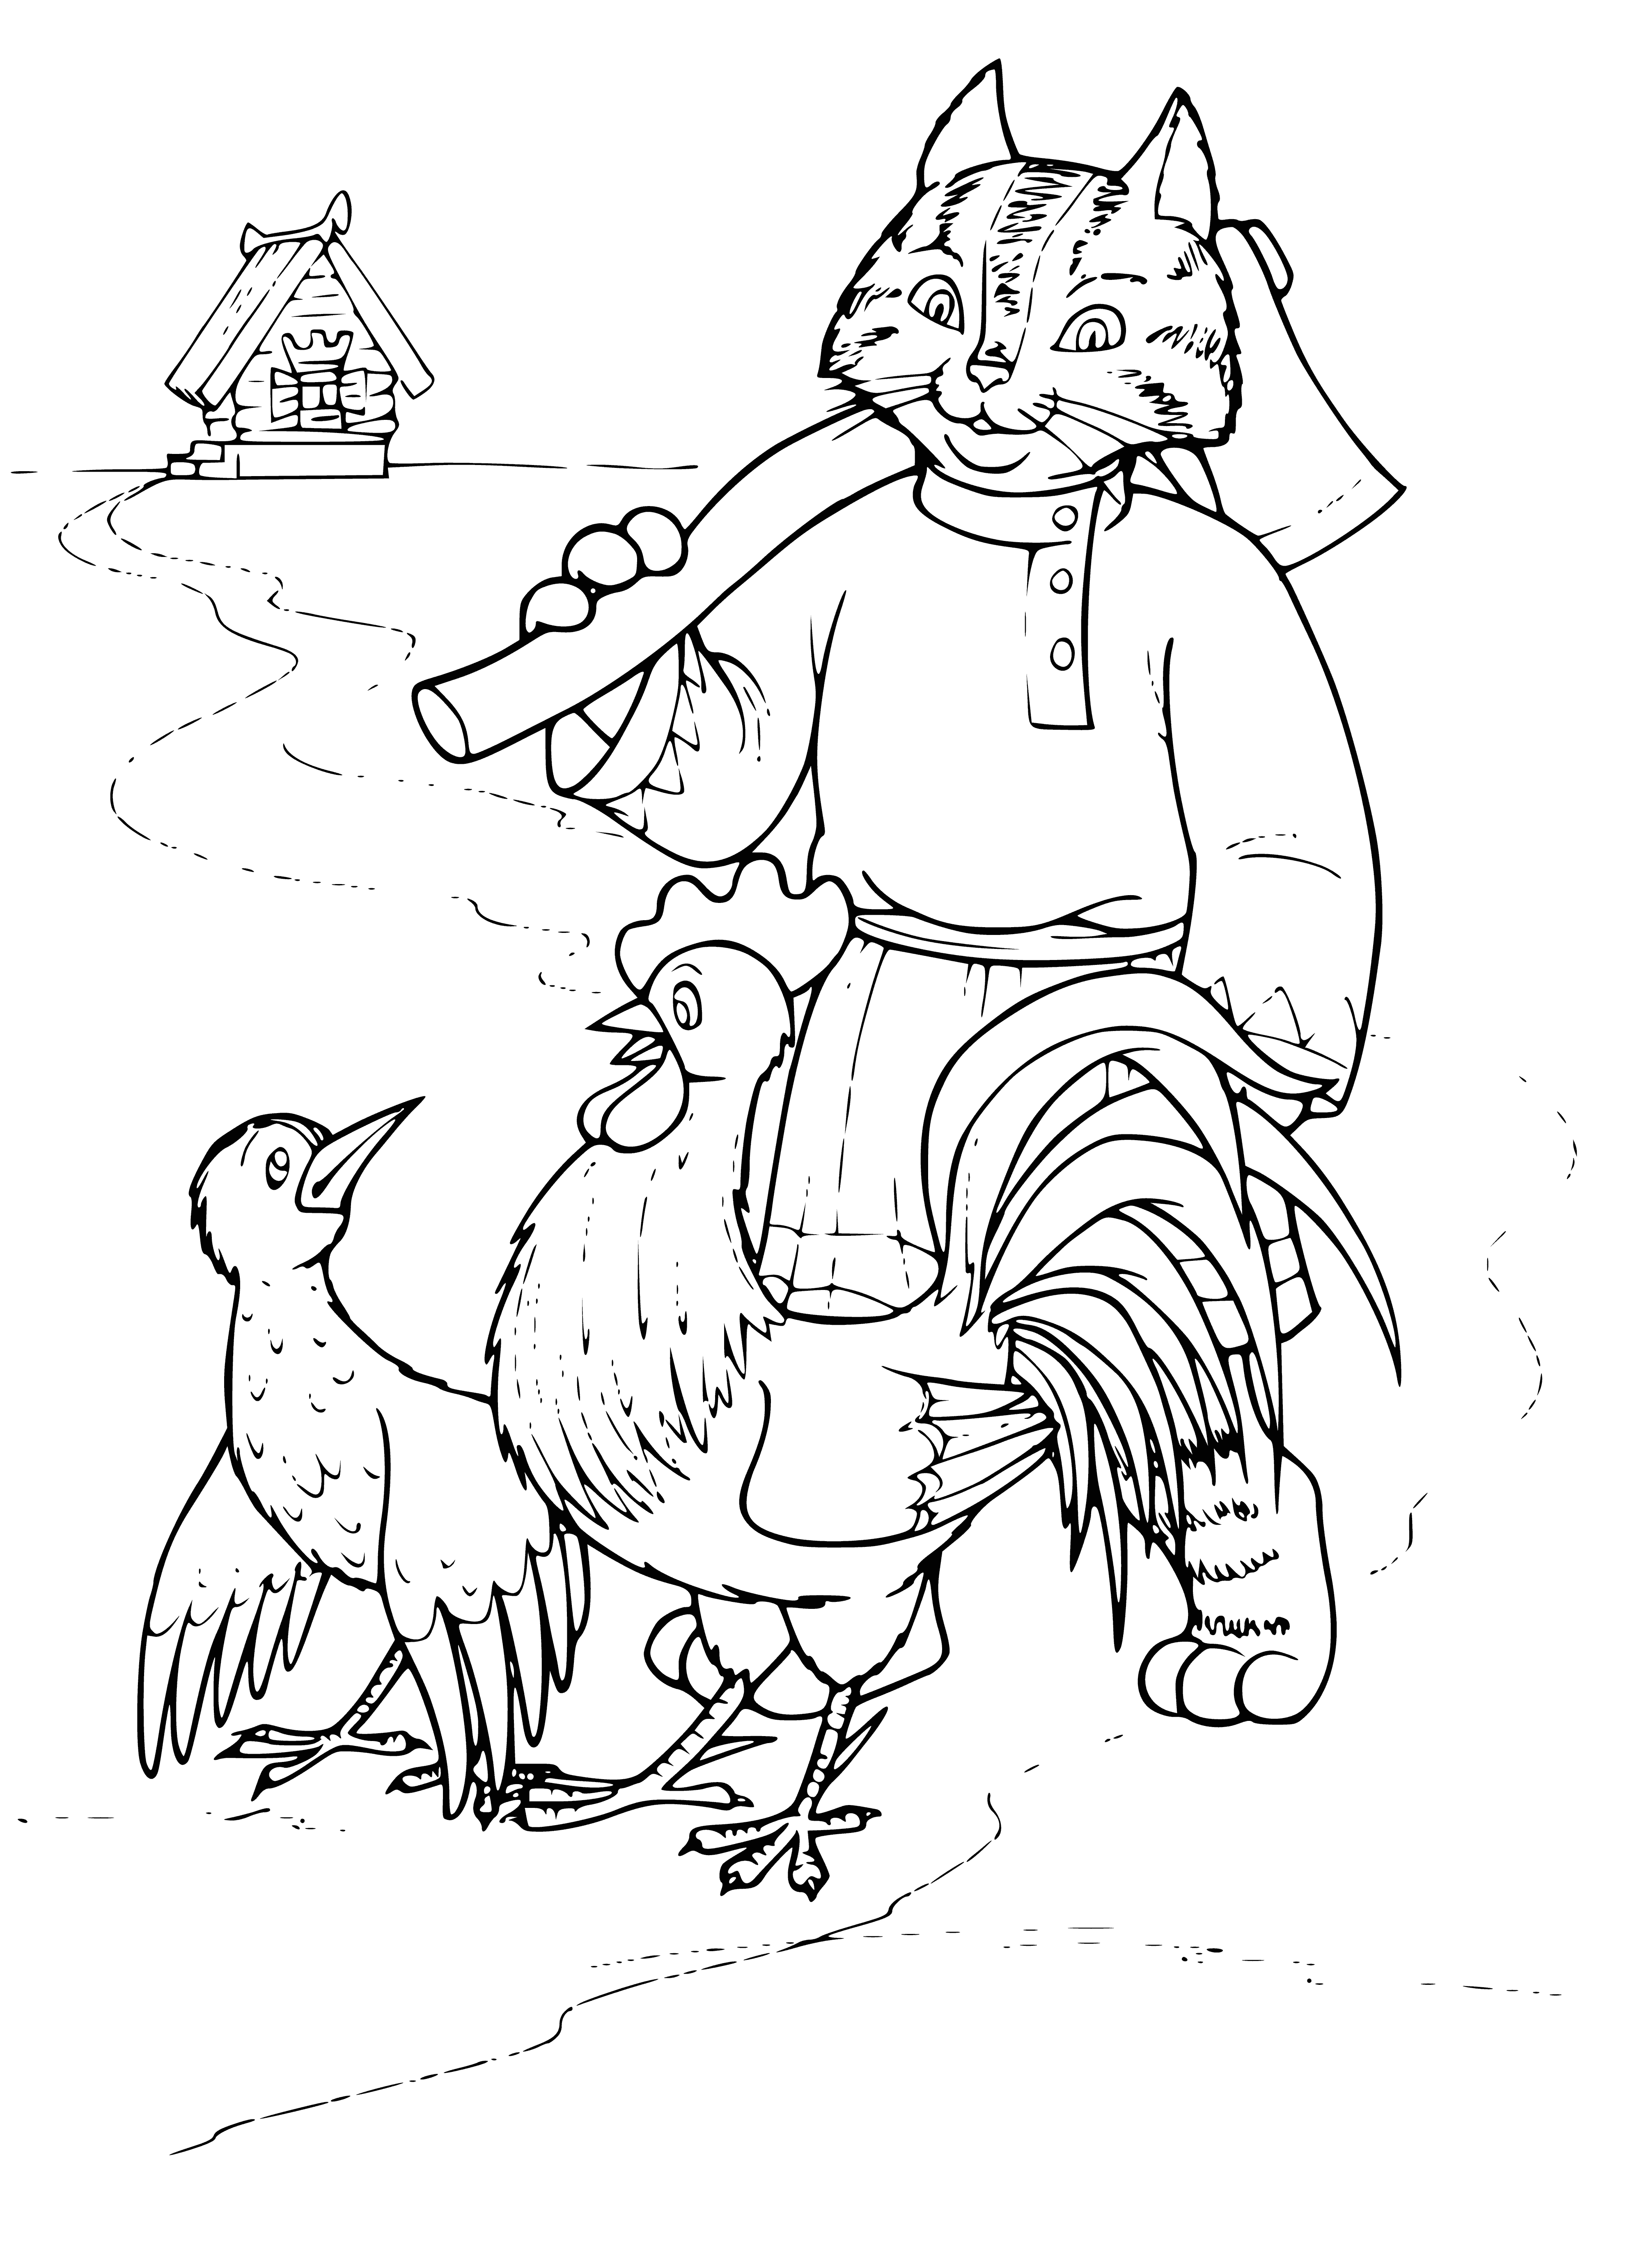 coloring page: A Cat, Thrush, and Rooster peacefully co-exist in a rural, Russian landscape, with rolling hills and trees.